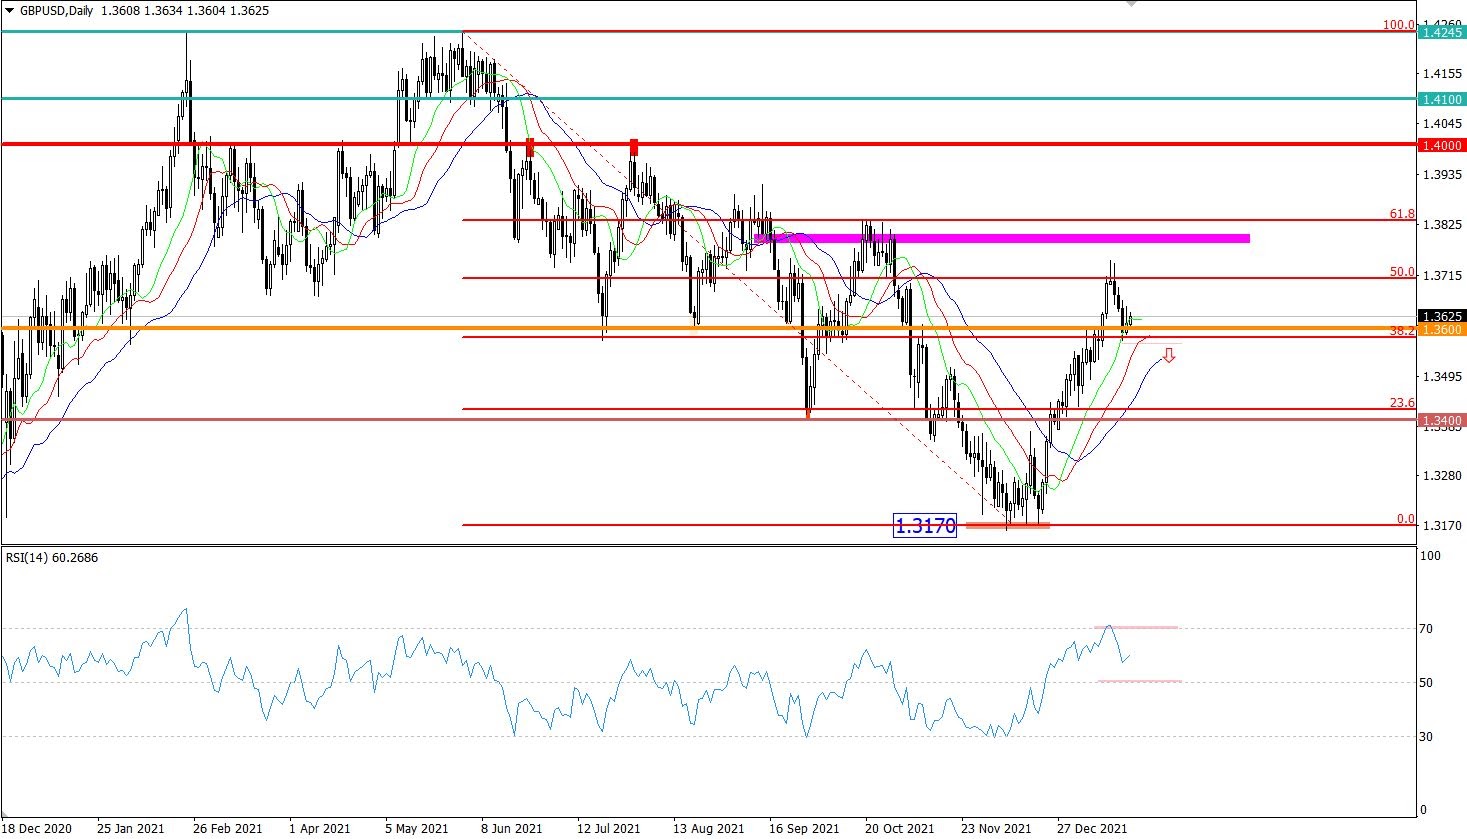 GBP/USD daily price chart.